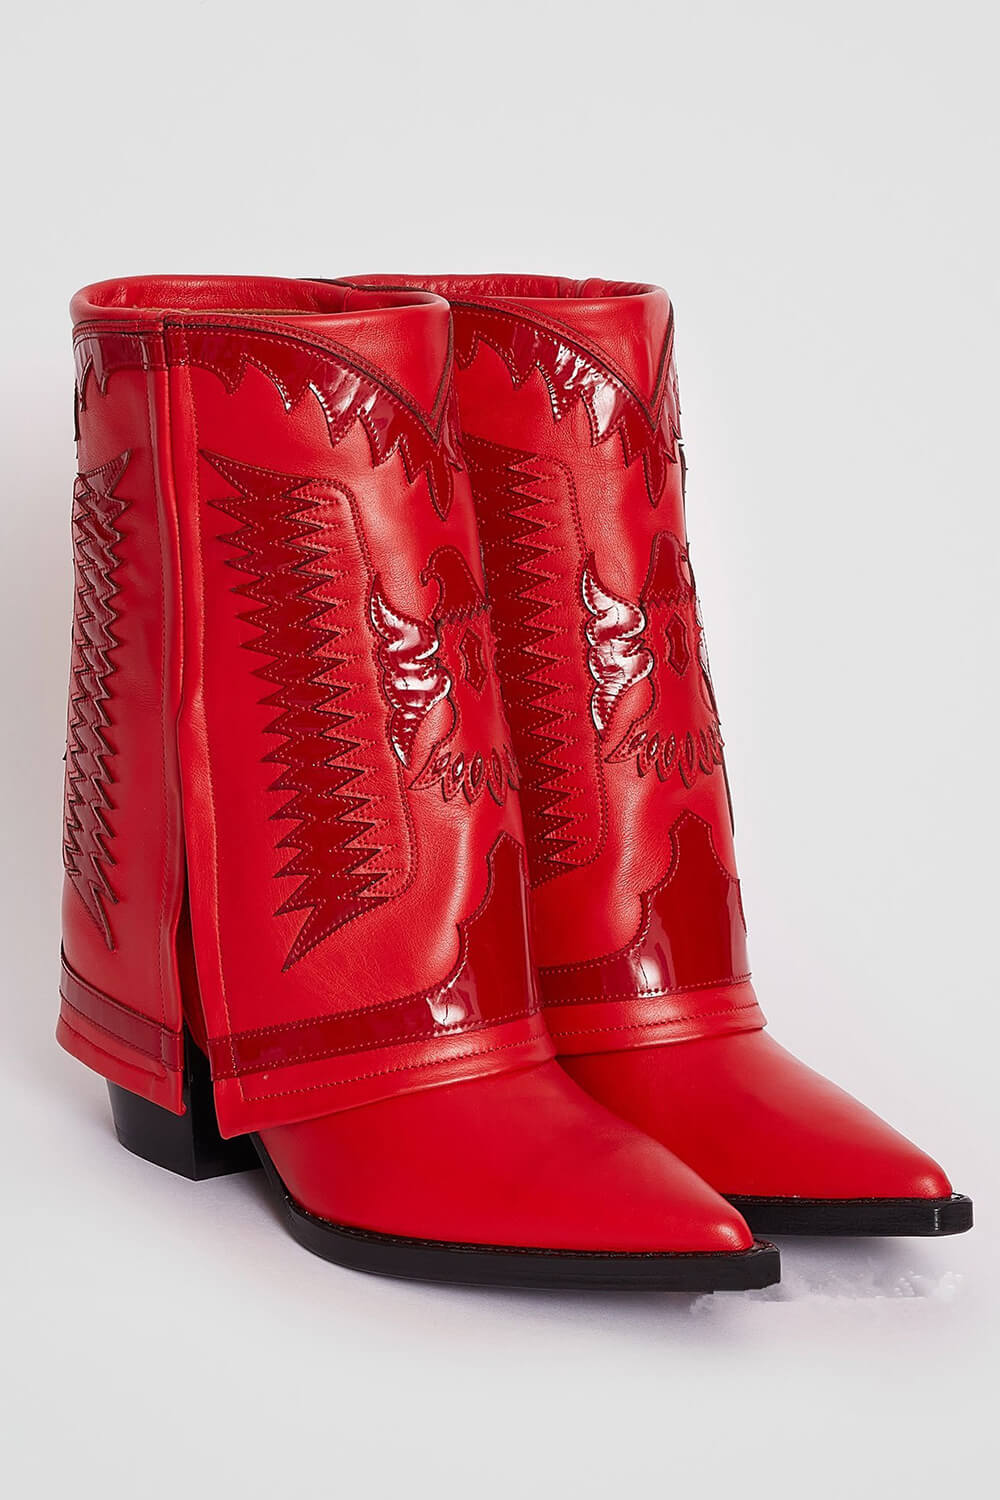 Western Cowboy Fold Over Pointed Toe Block Heel Ankle Boots - Red